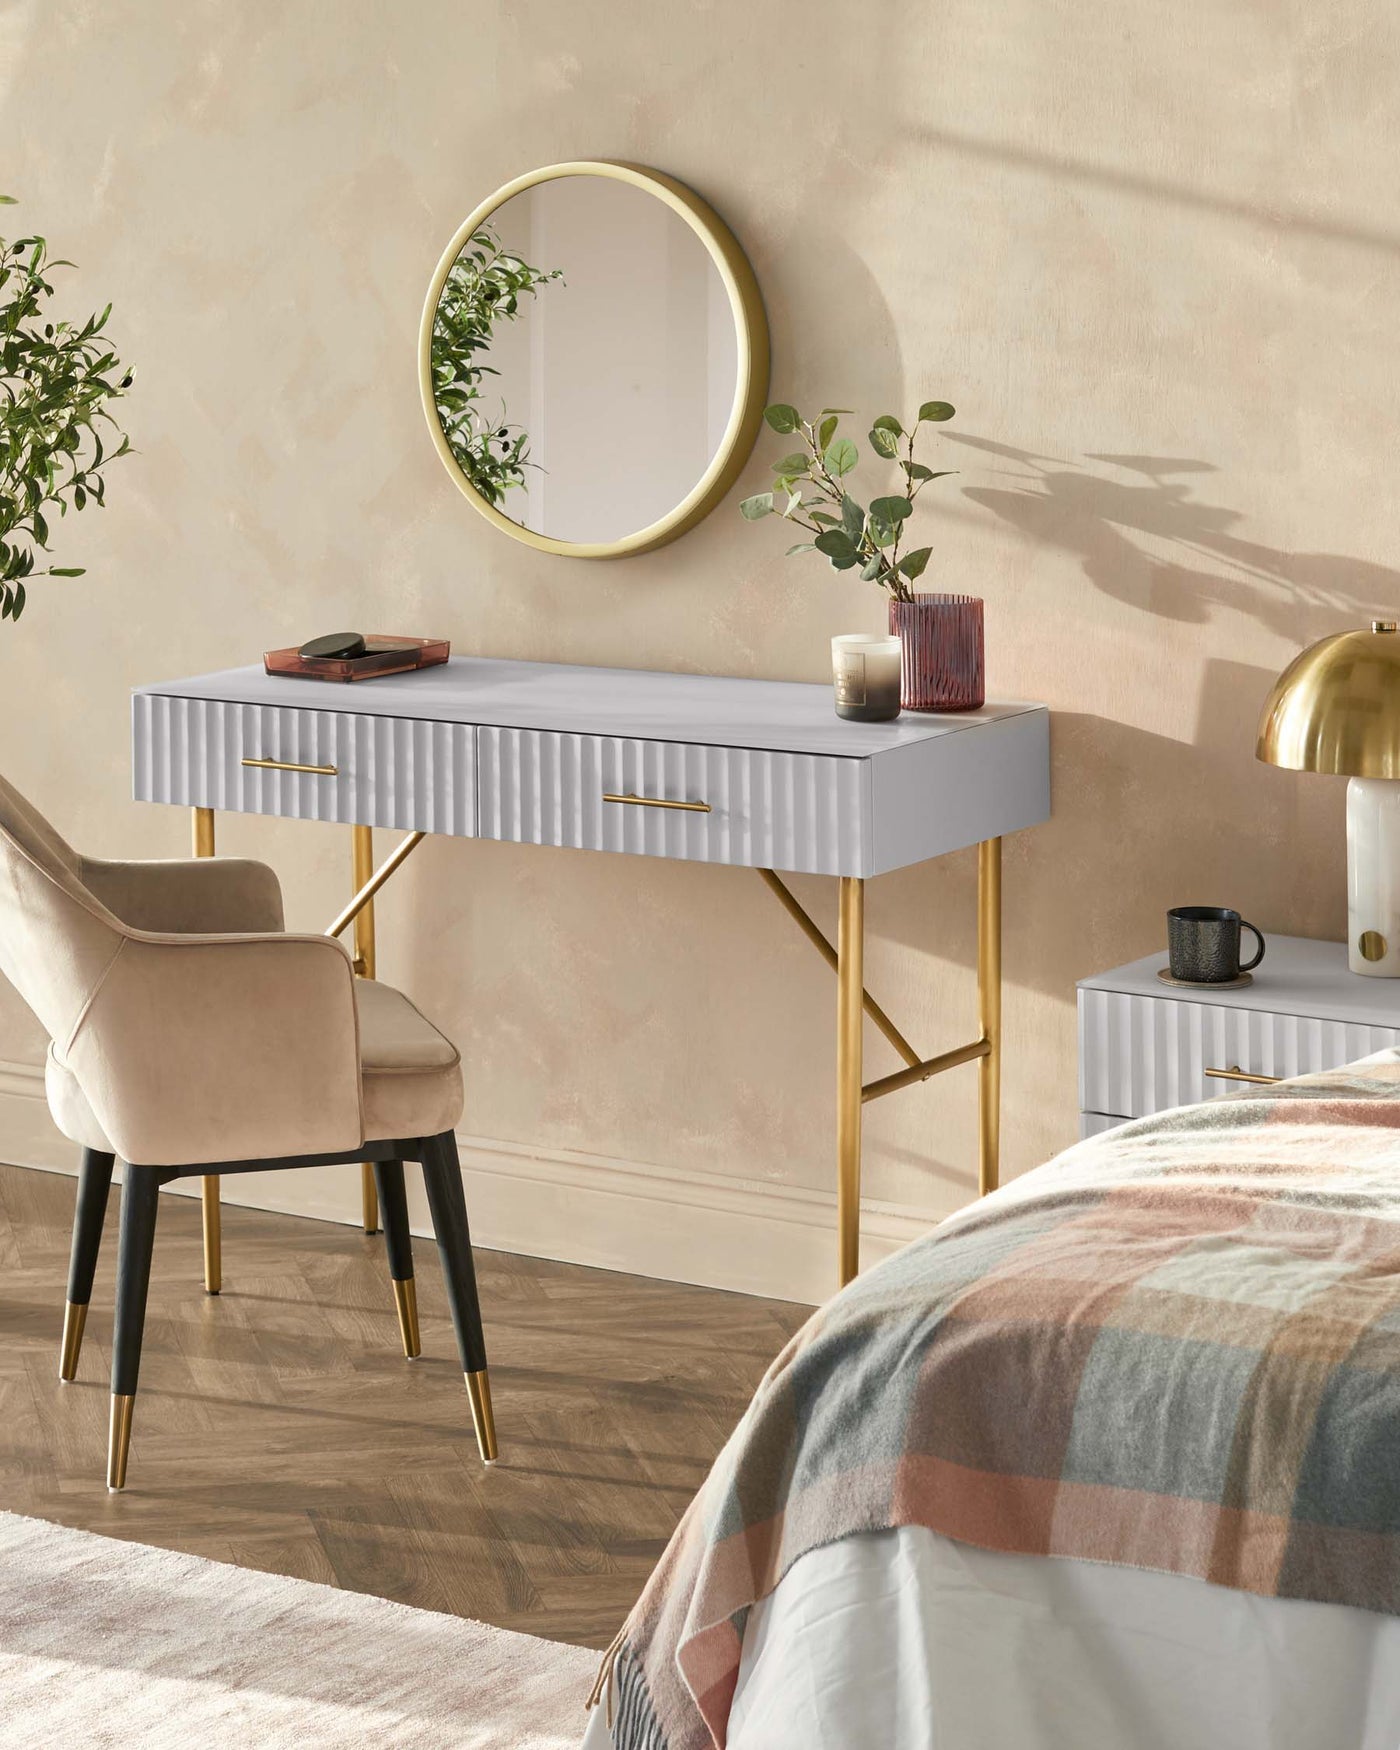 Contemporary light grey desk with a ribbed front and slim golden legs paired with a beige upholstered chair featuring black legs with golden feet accents.